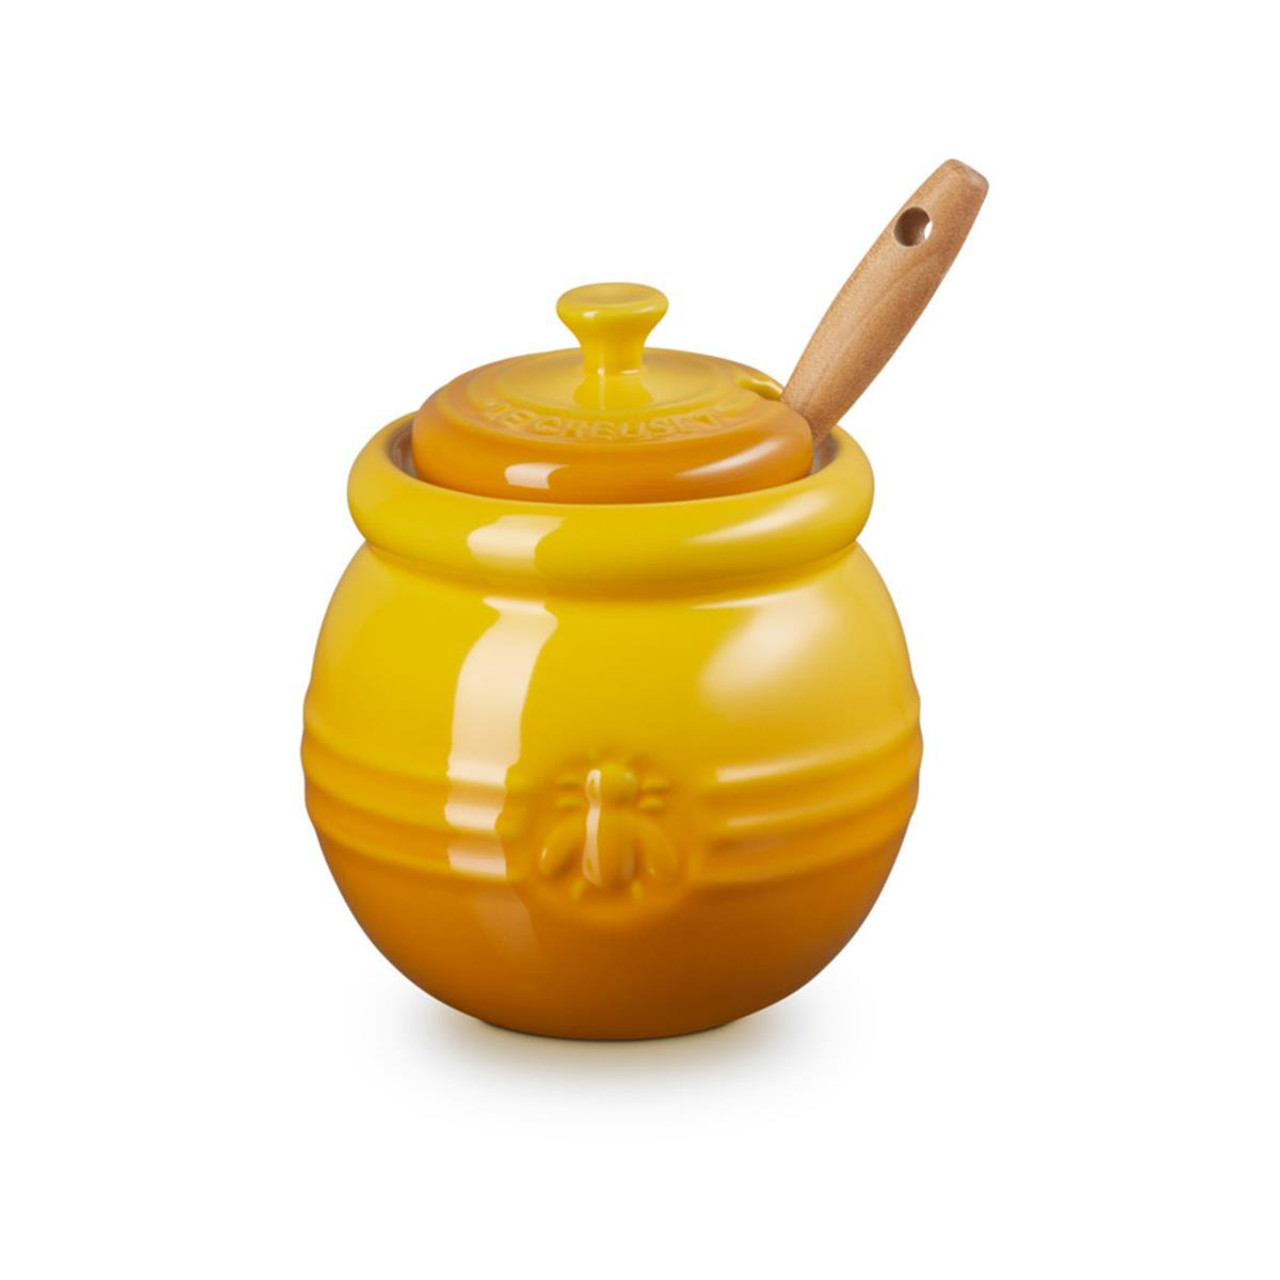 What if you're late and can't wash your le creuset honey pot?